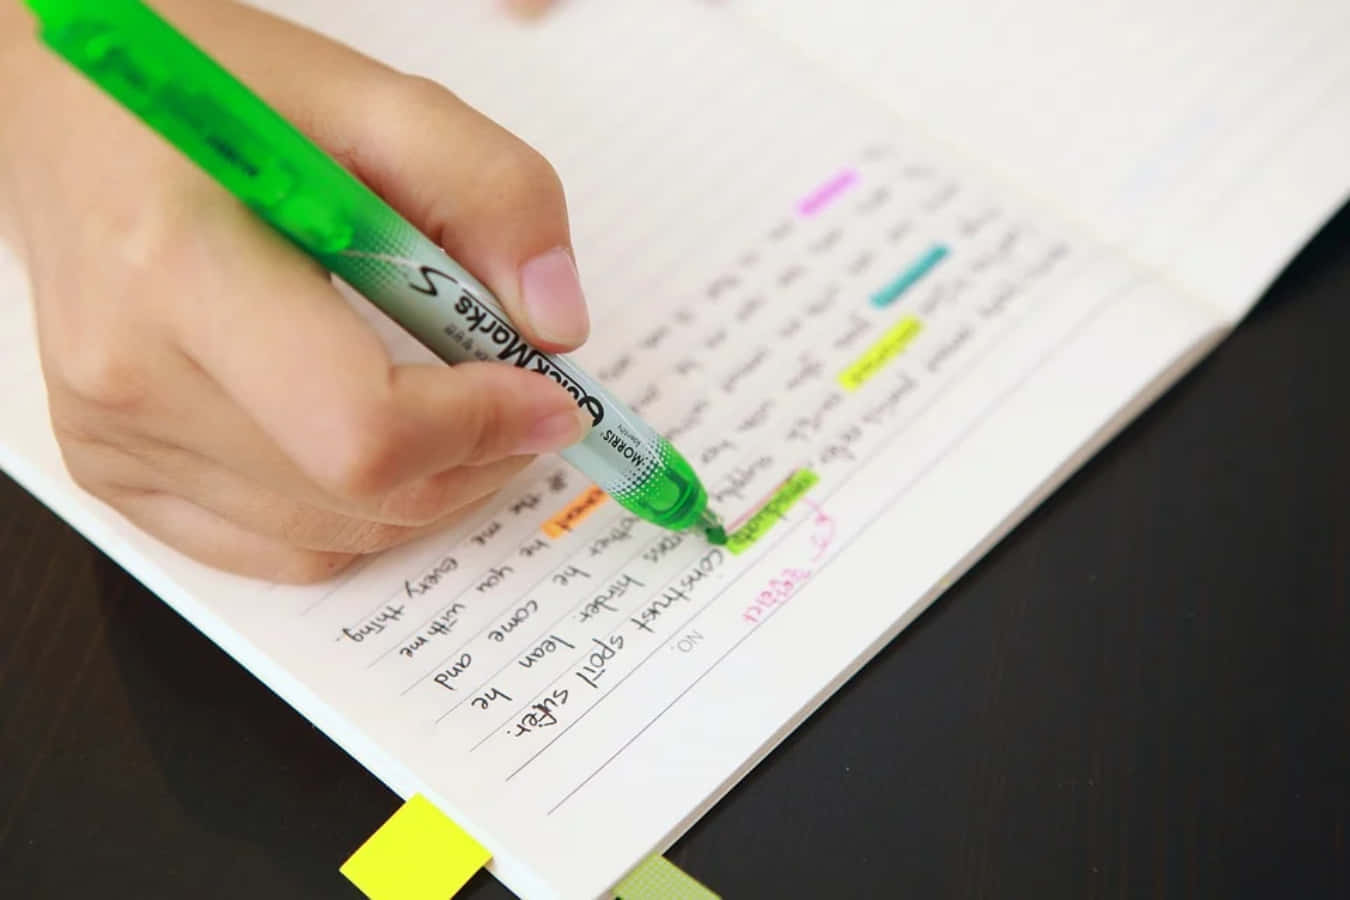 A Person Writing In A Notebook With A Green Pen